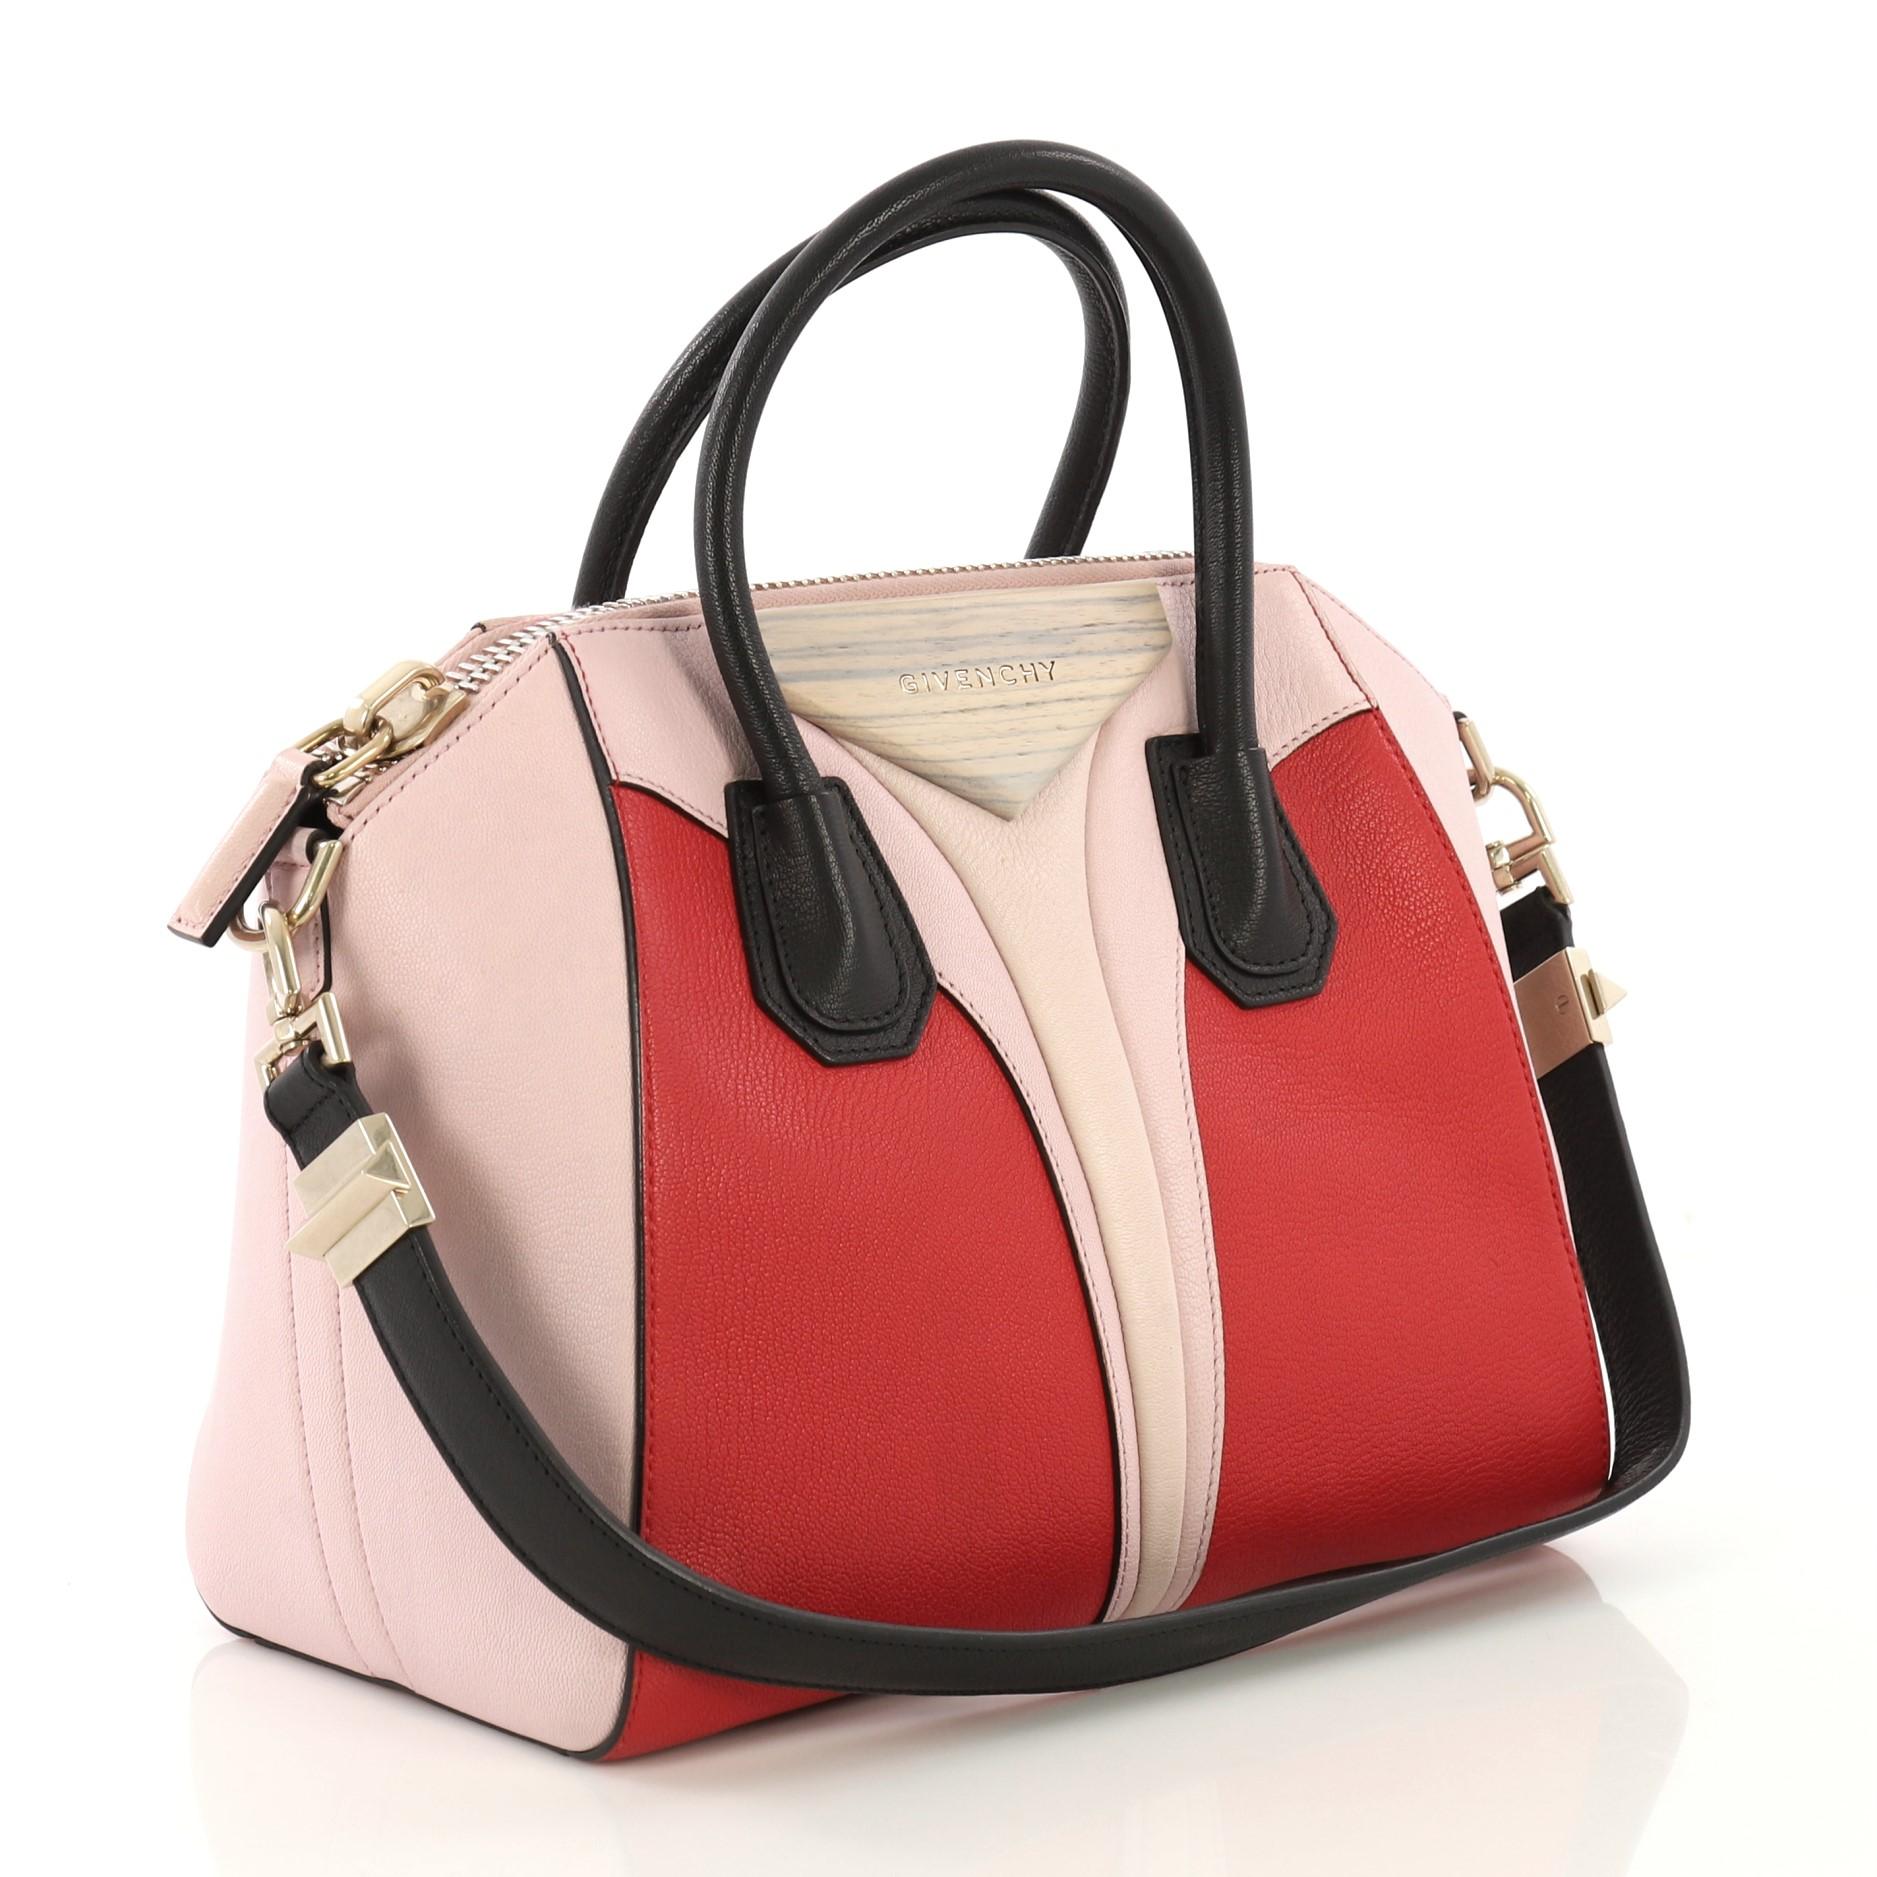 This Givenchy Tricolor Antigona Bag Leather Medium, crafted in pink multicolor leather, features dual rolled leather handles, envelope fold with raised logo, and gold-tone hardware. Its zip closure opens to a black fabric interior with side zip and